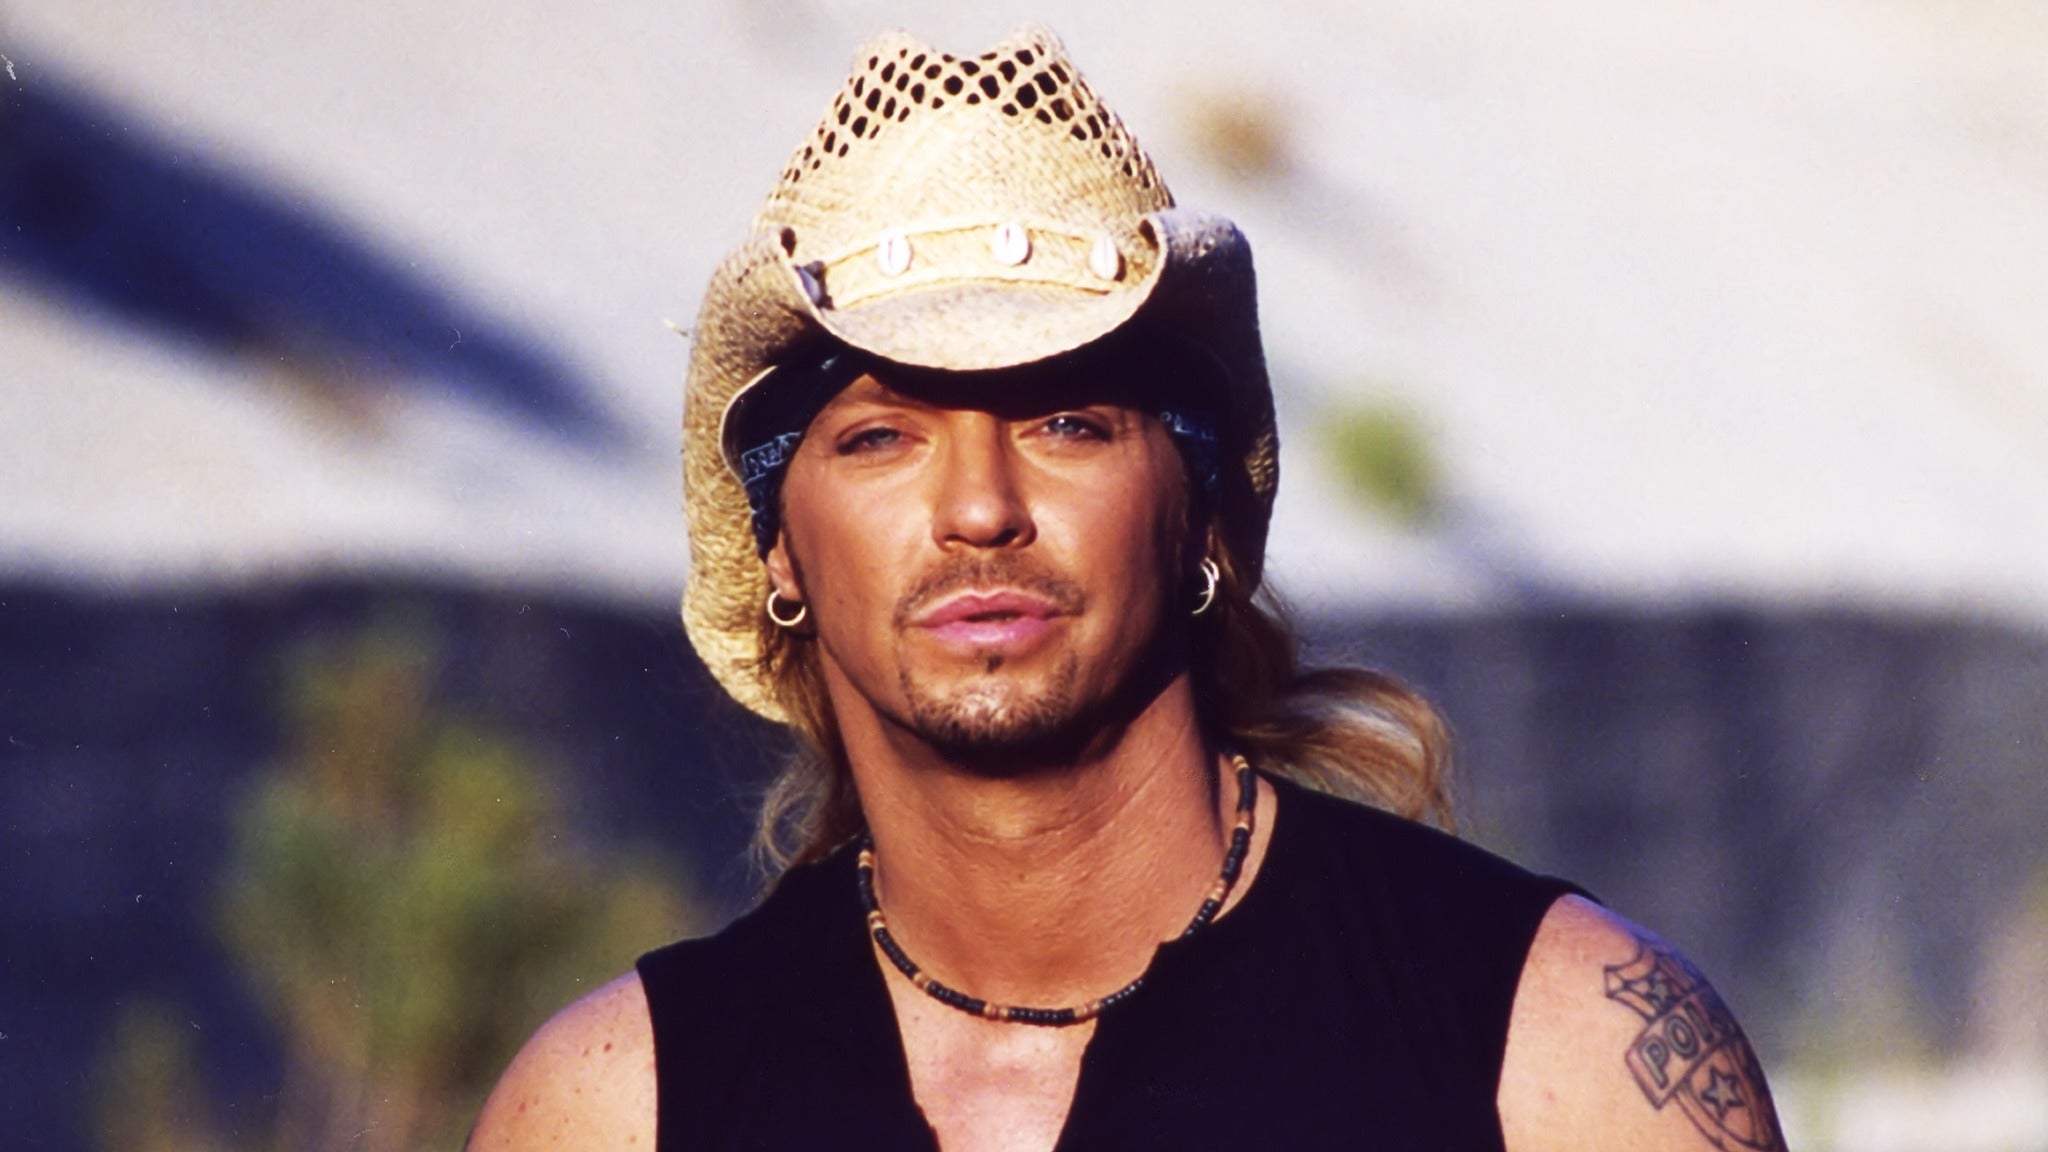 Bret Michaels - Nothin' But A Good Vibe 2022